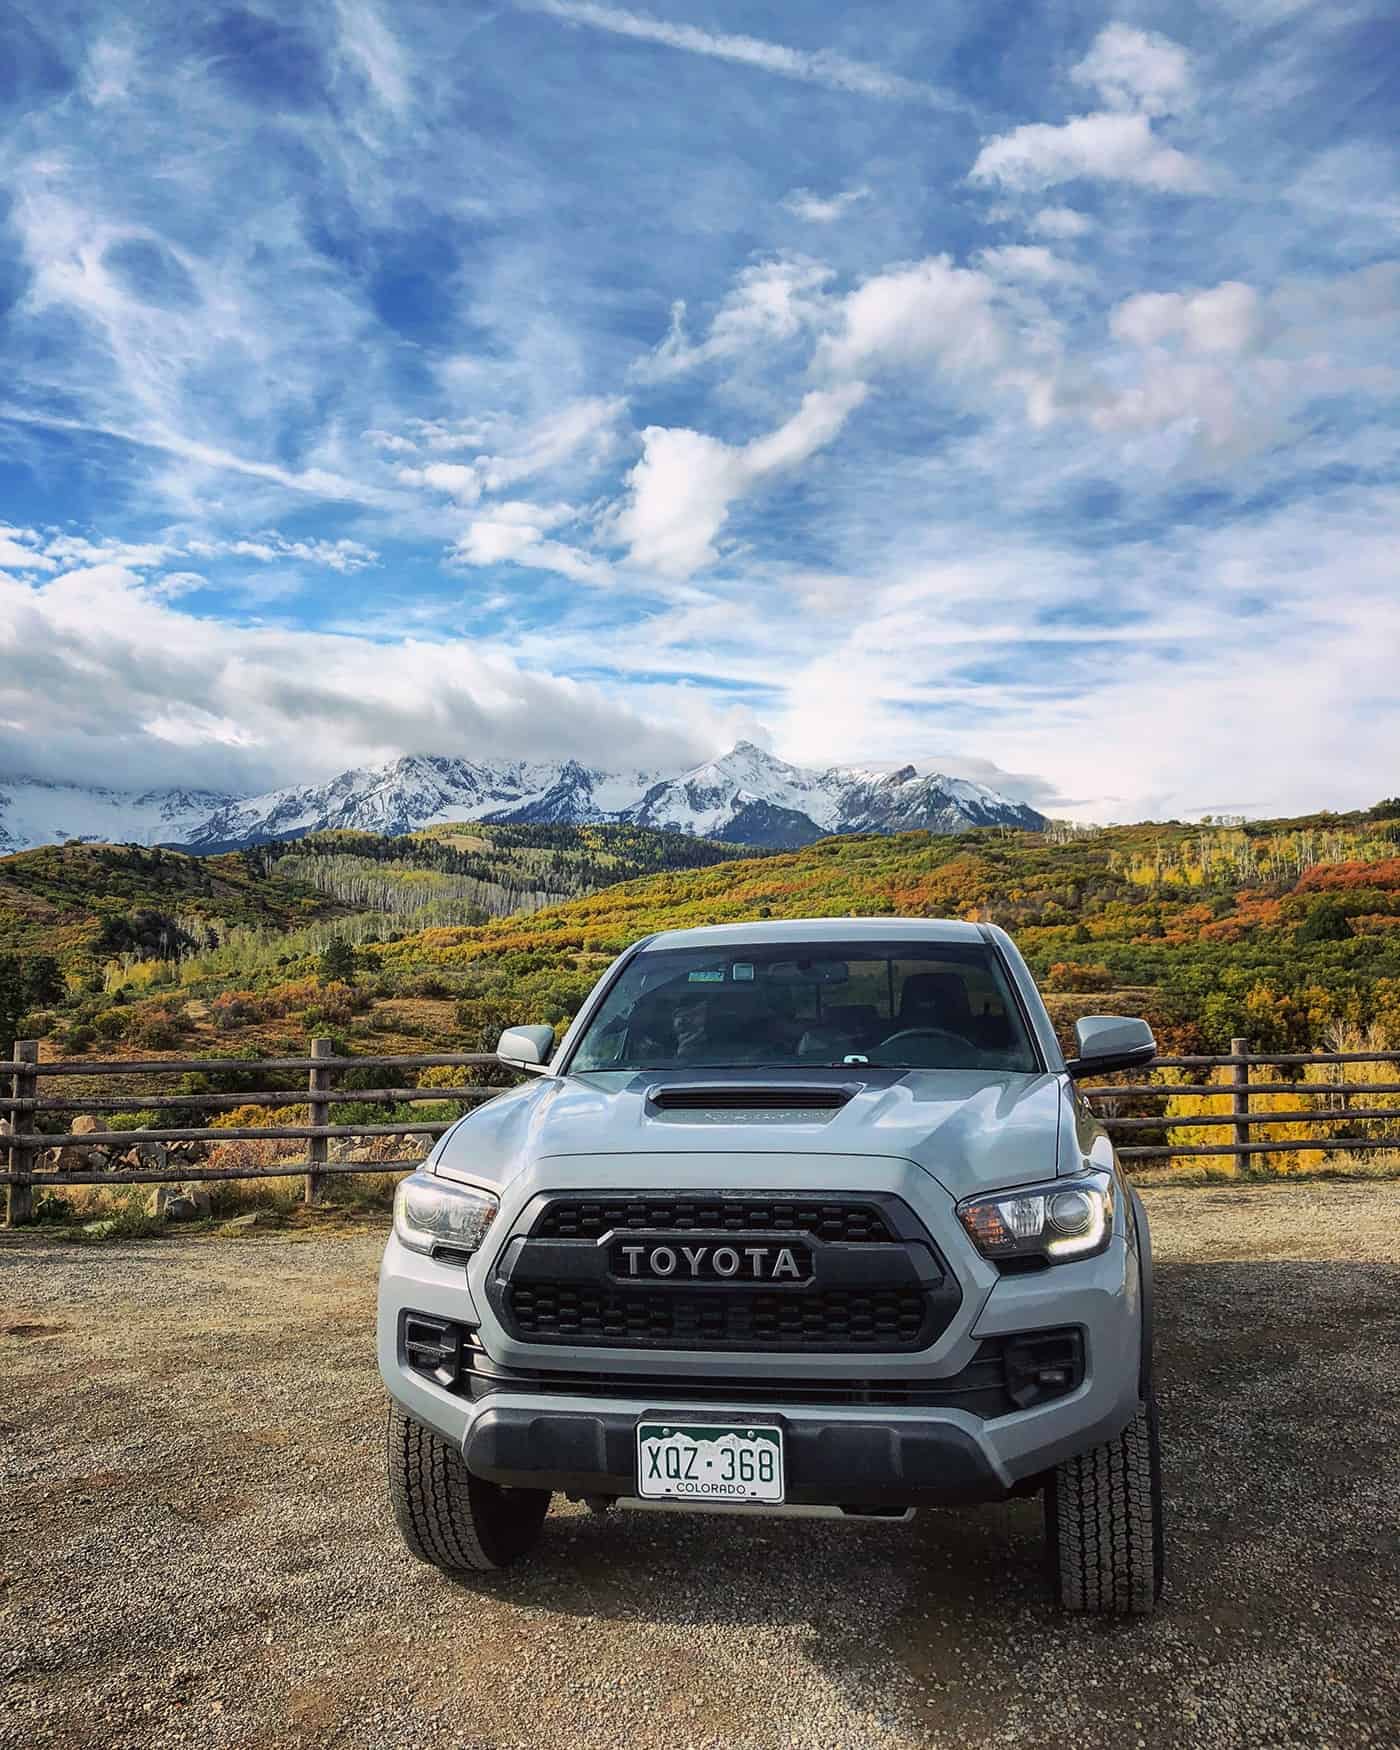 Million Dollar Highway With Toyota #letsgoplaces